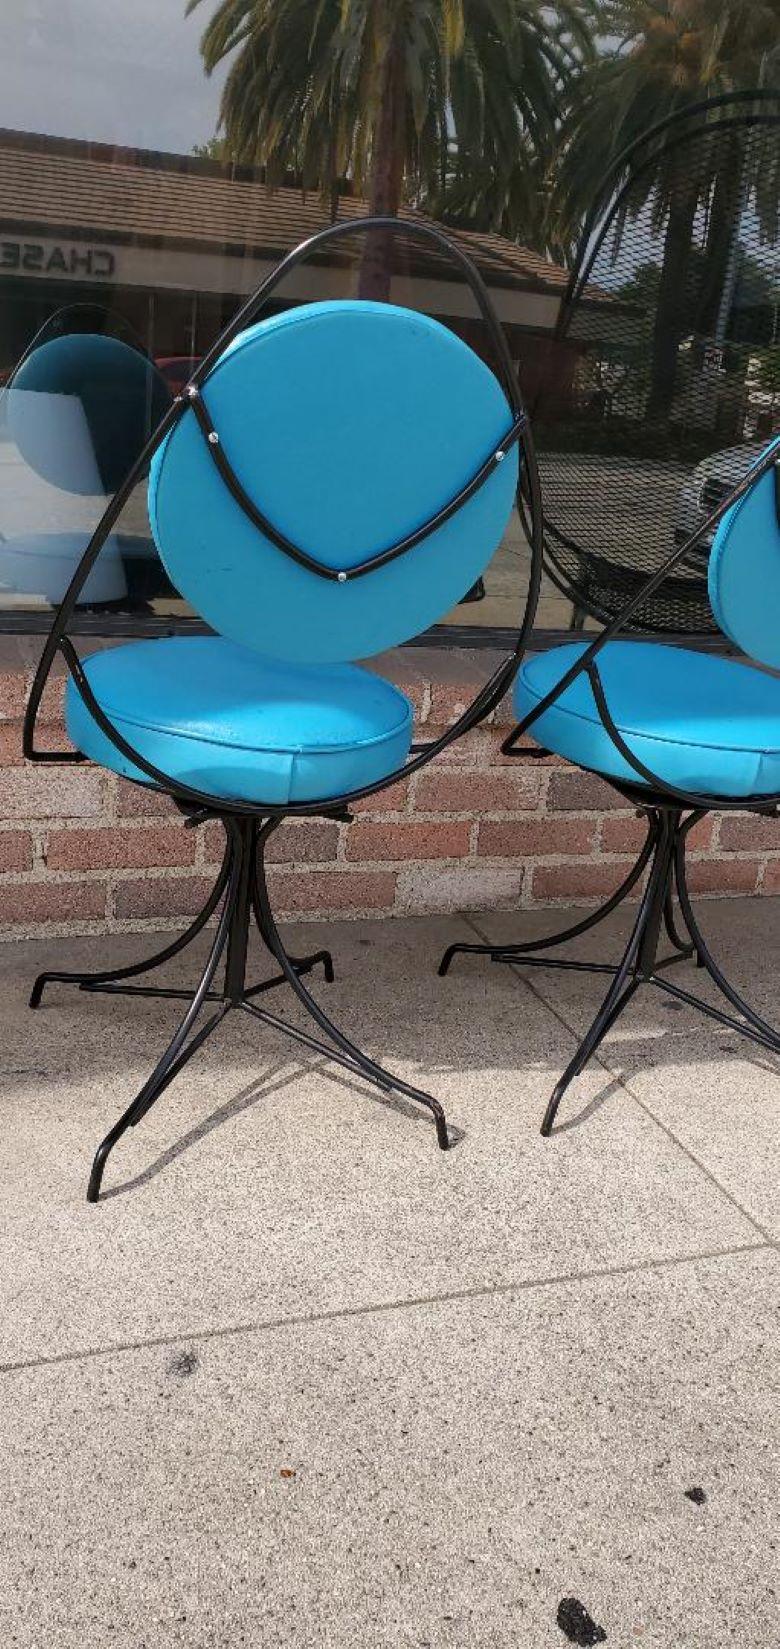 1950s Black and Blue Swivel Side Chairs Styled After John Risley - Set of 2 For Sale 3